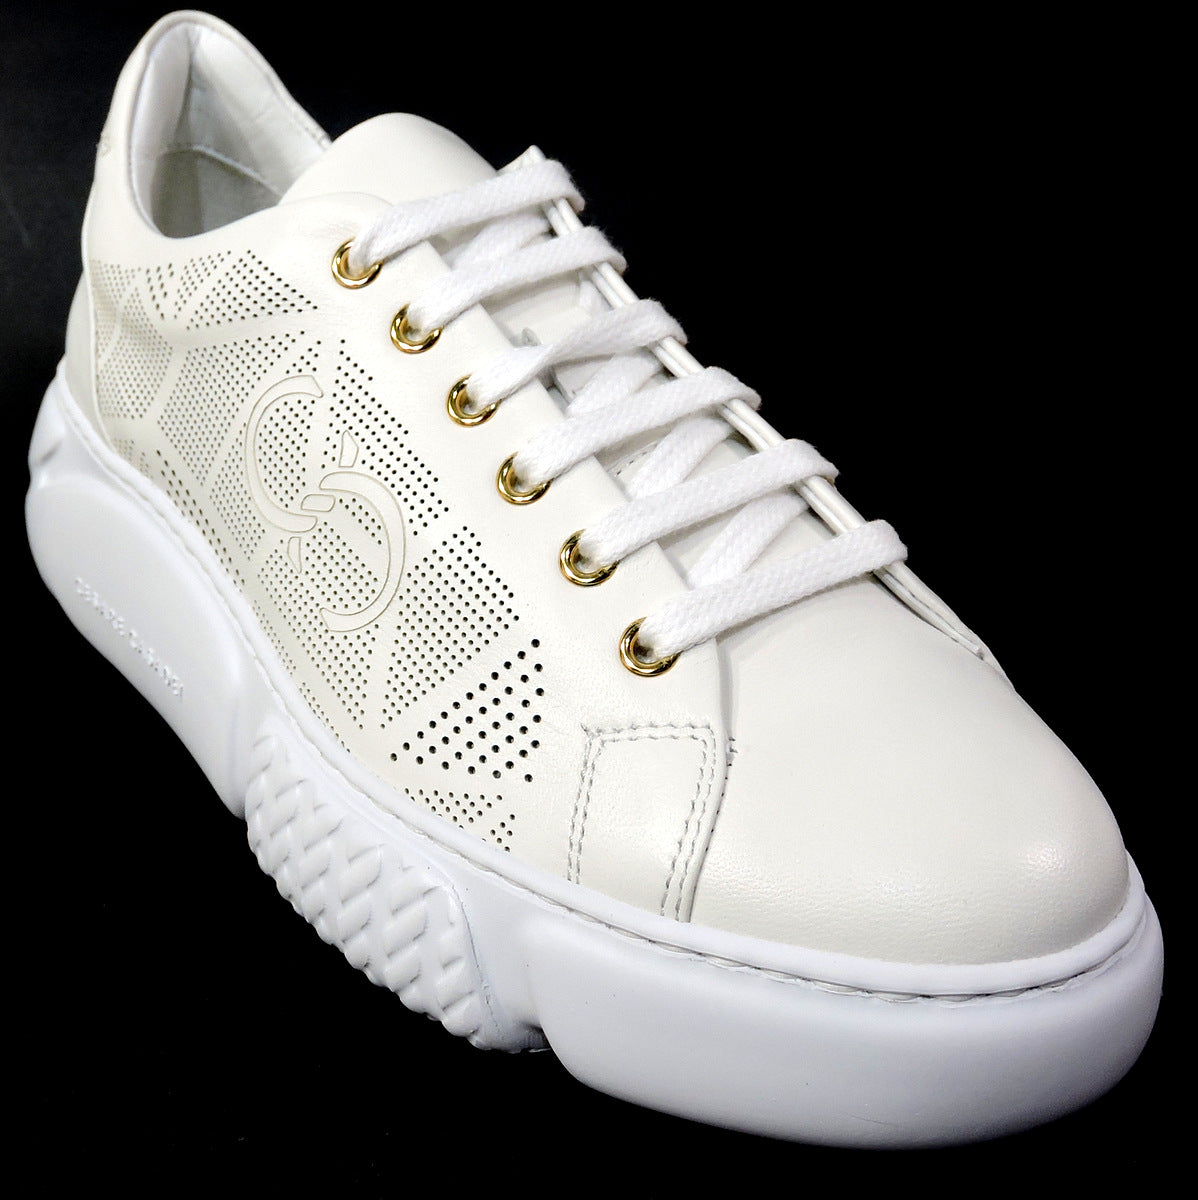 CASADEI 🇮🇹 WOMEN'S OFF WHITE LEATHER COMFORT FASHION SNEAKERS